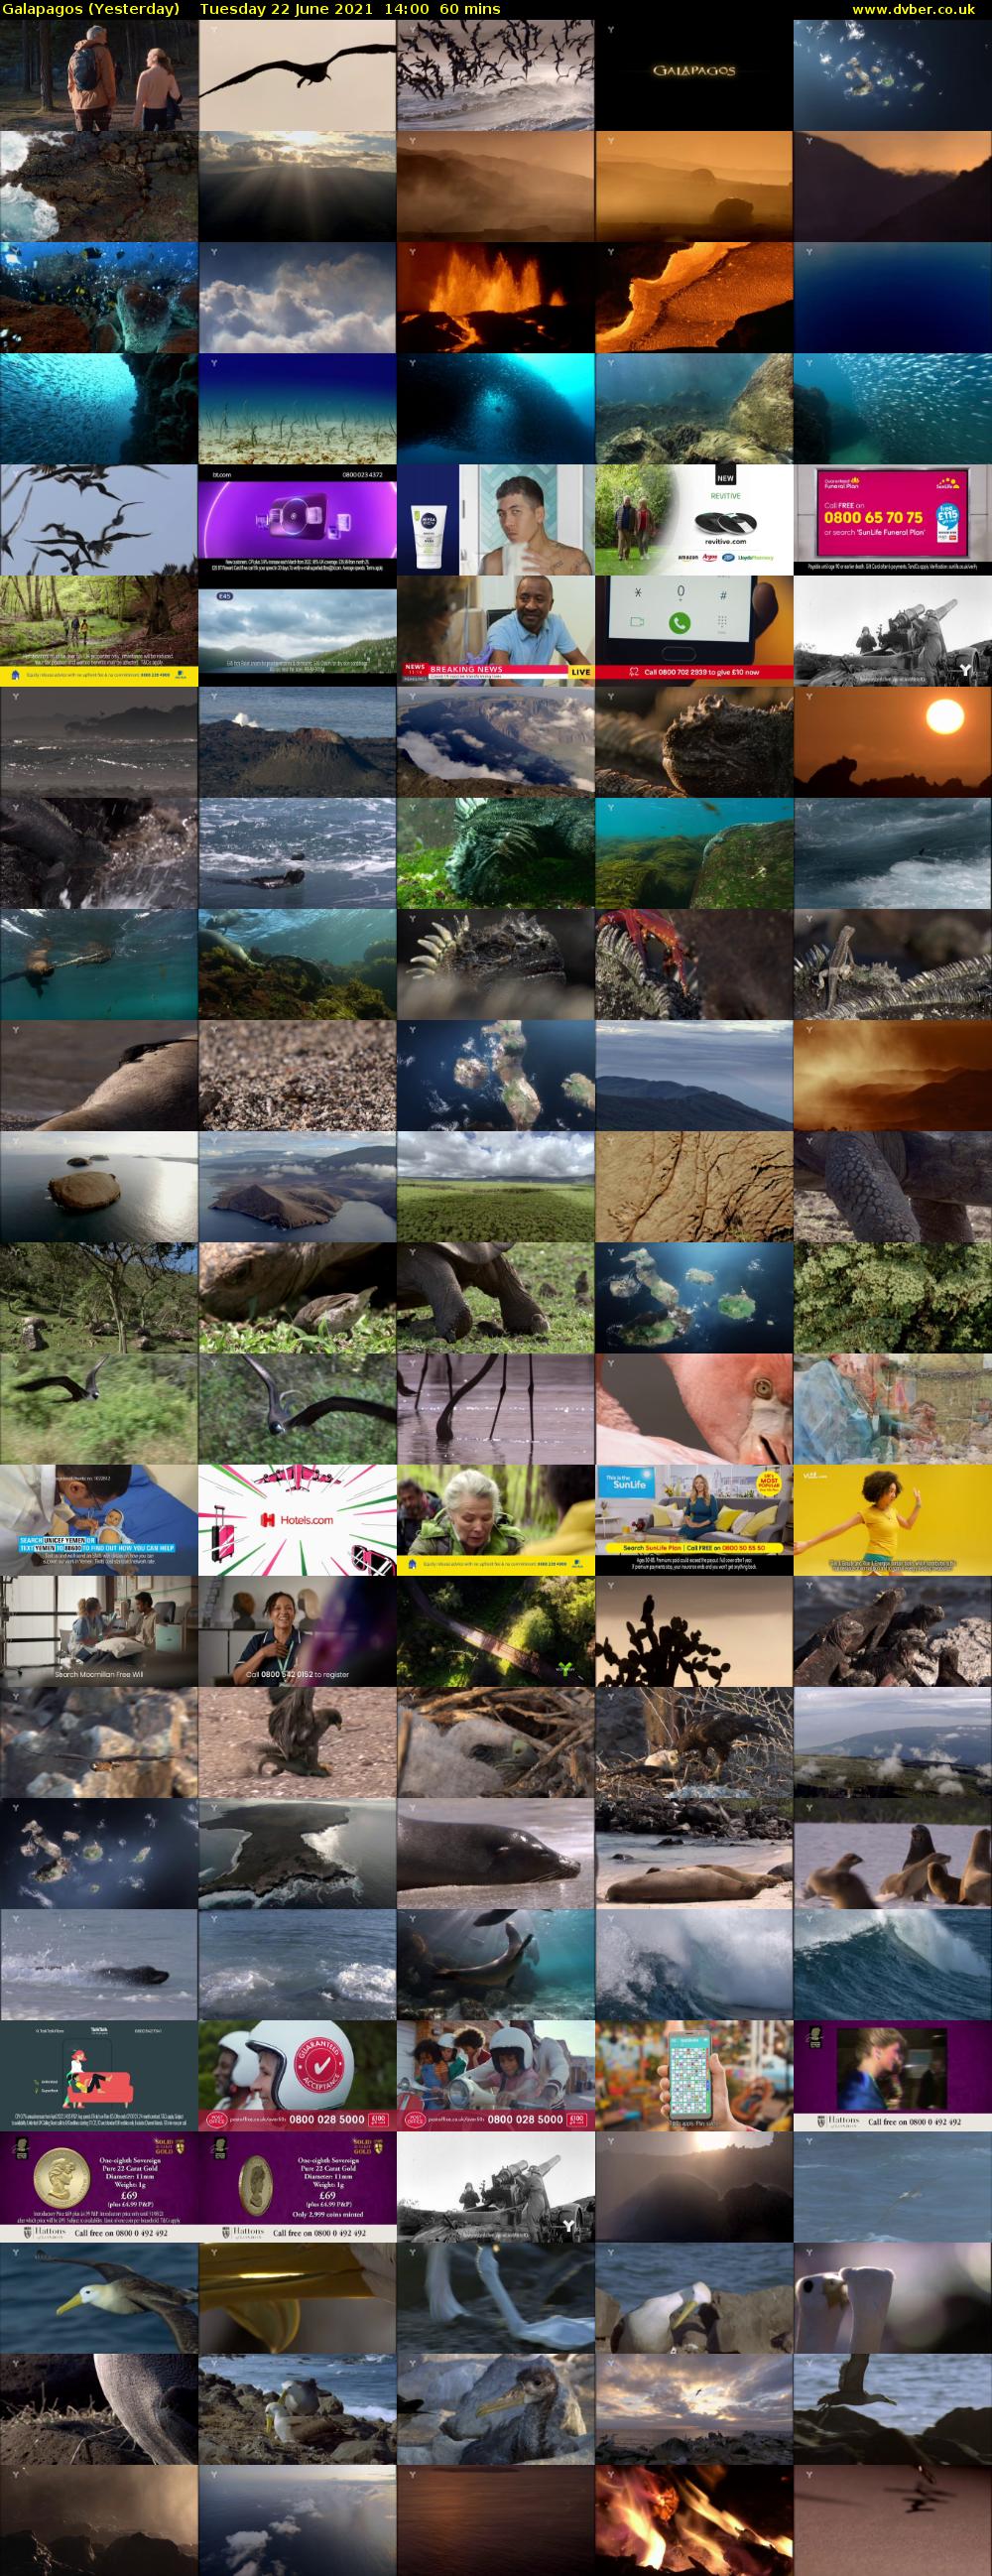 Galapagos (Yesterday) Tuesday 22 June 2021 14:00 - 15:00